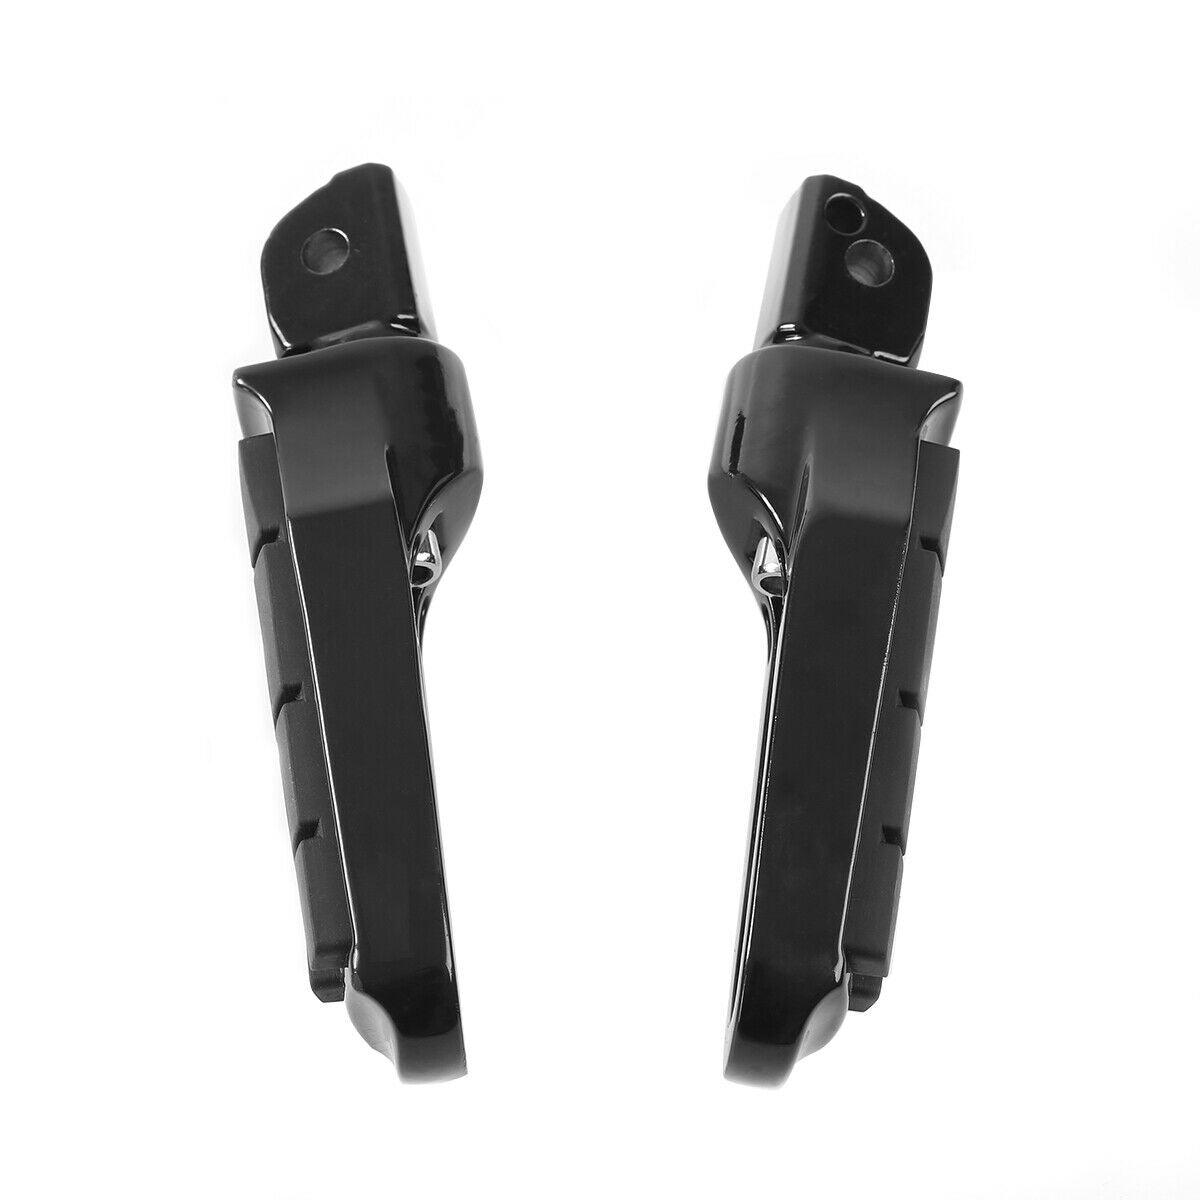 Pair Black Rear Footpegs Foot Rest Fit For Harley FXBB Street Bob 107 2018-2020 - Moto Life Products